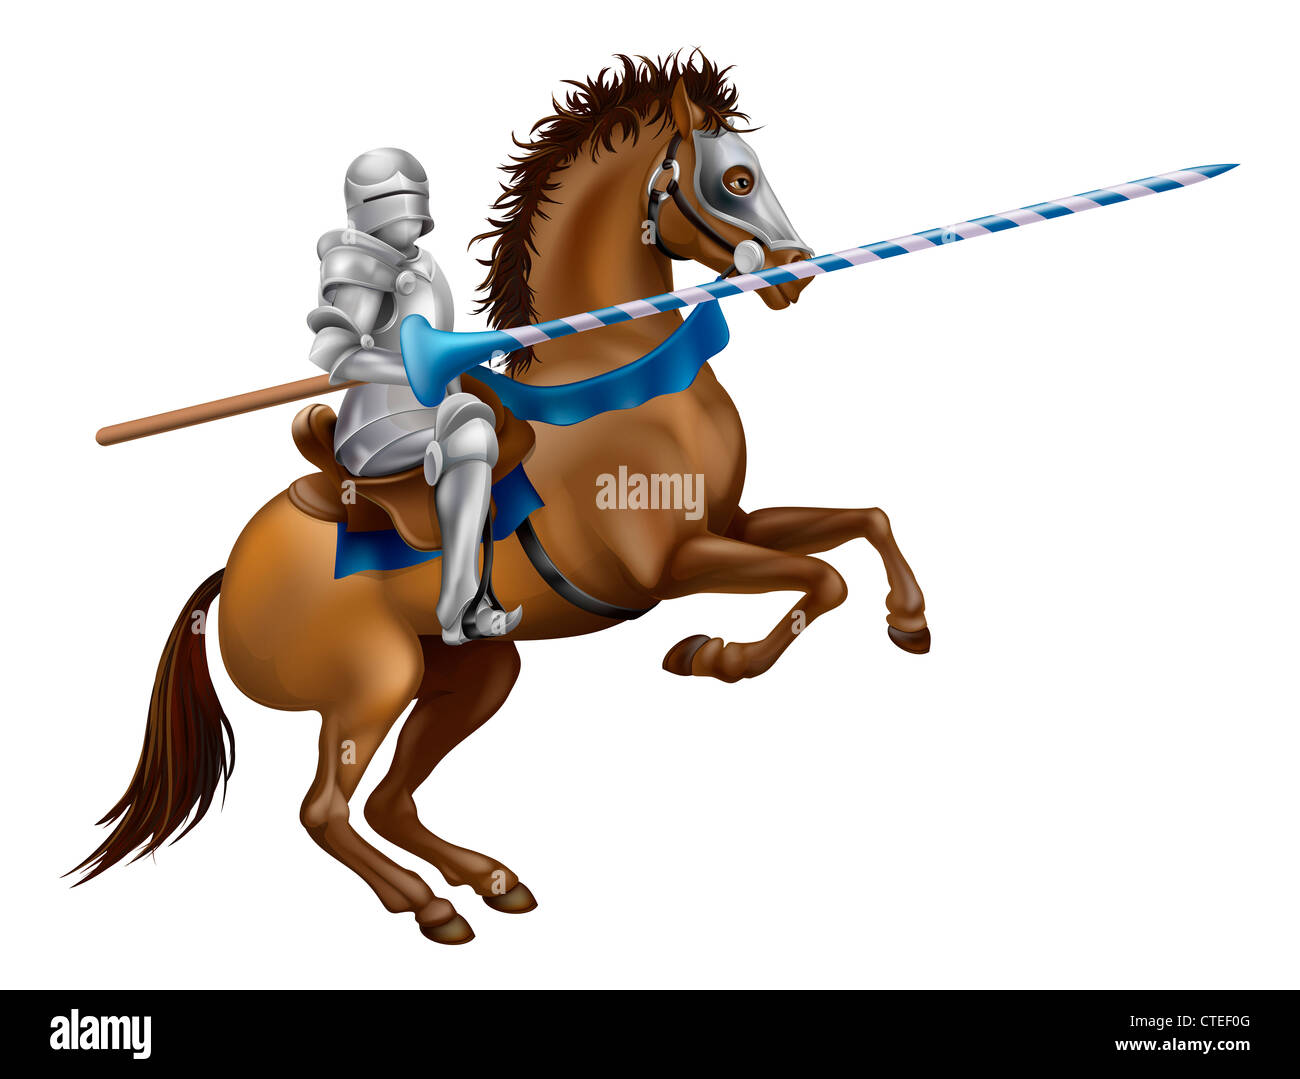 Drawing of a jousting knight in armour on horse back. Stock Photo